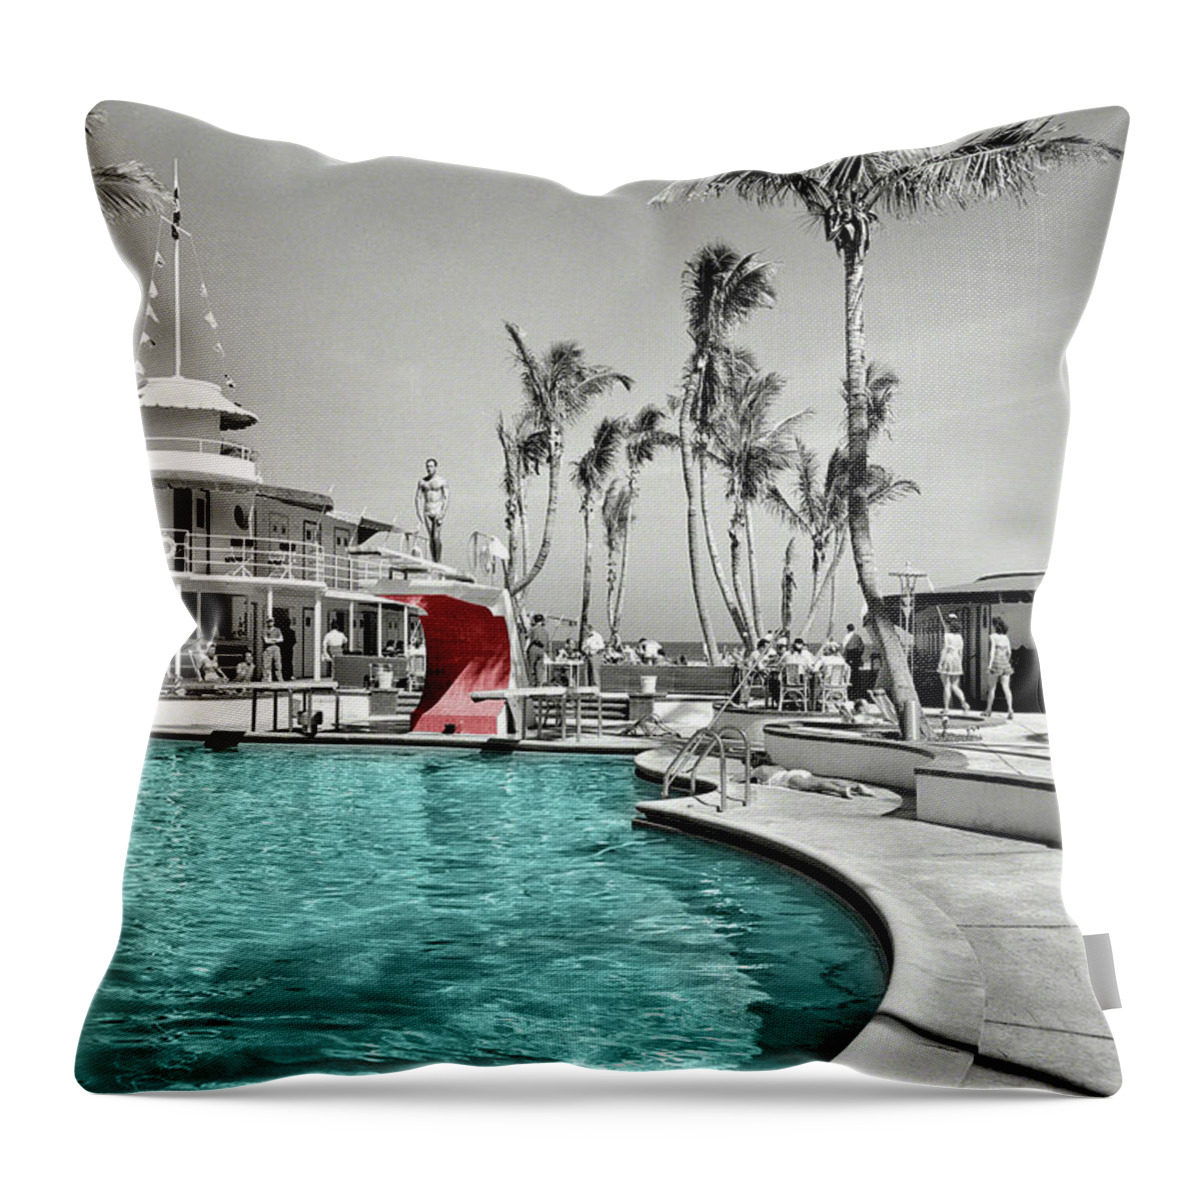 Vintage Miami Throw Pillow featuring the photograph Vintage Miami 2 by Andrew Fare